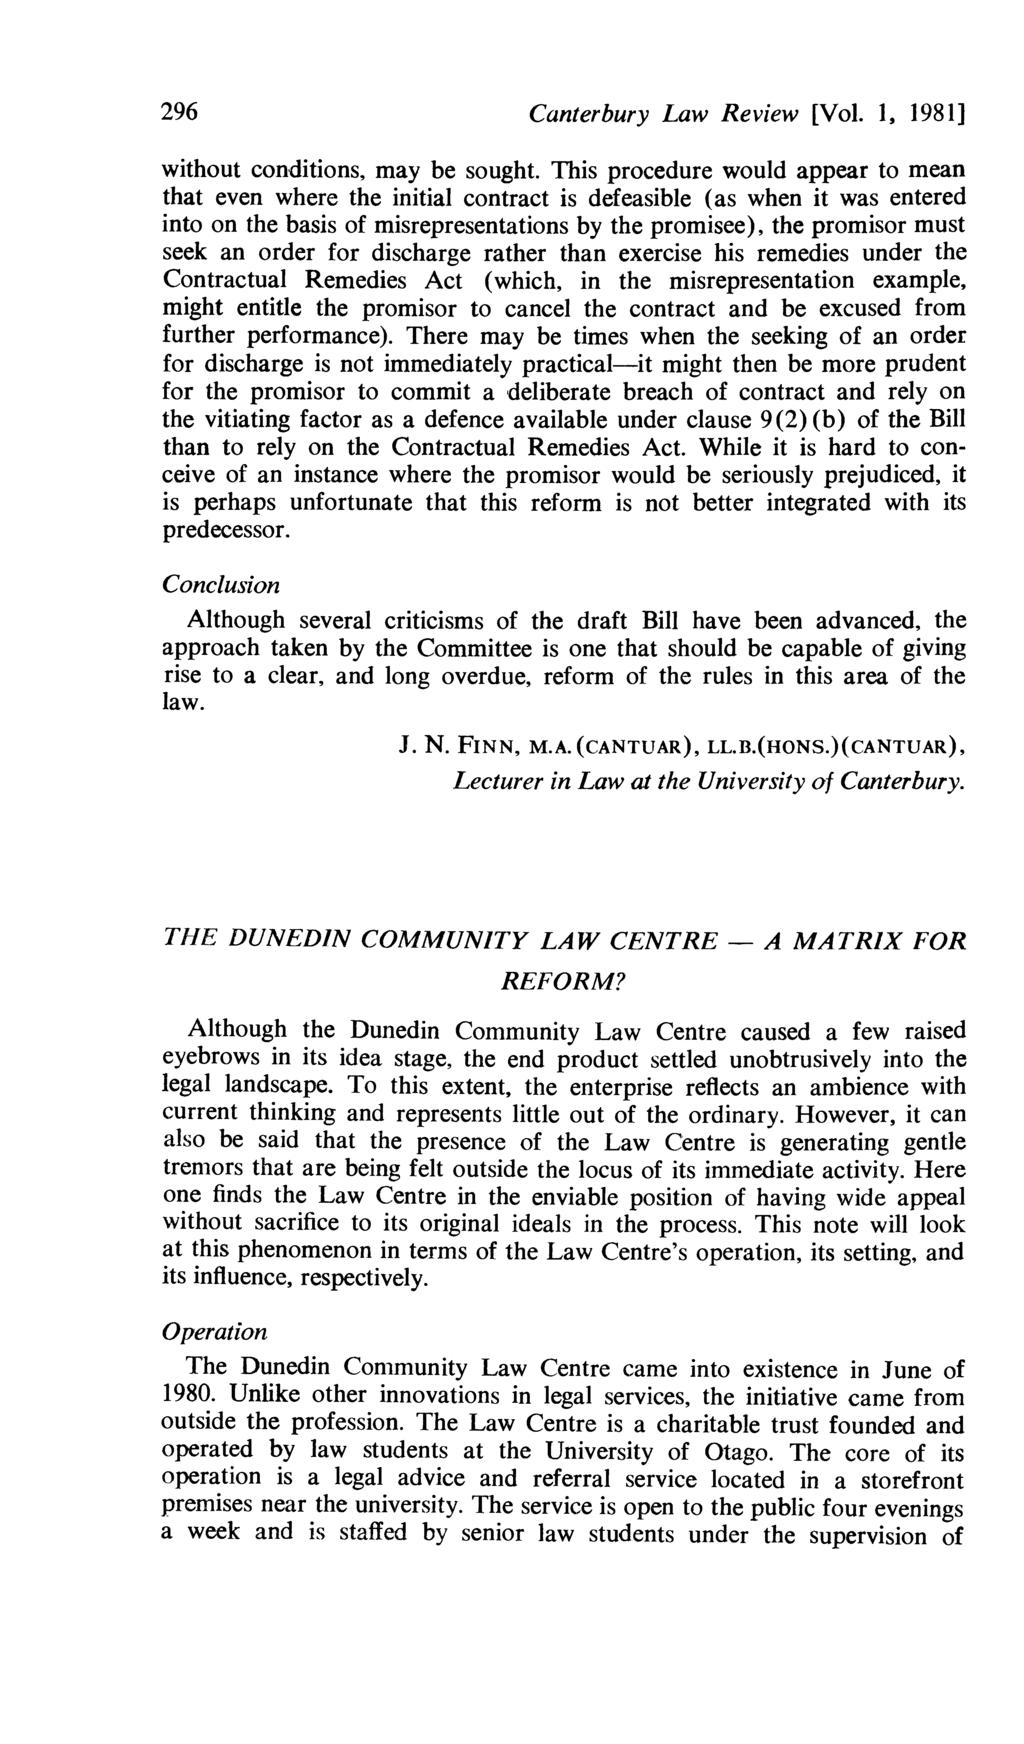 296 Cunterbury Law Review [Vol. 1, 19811 without conditions, may be sought.